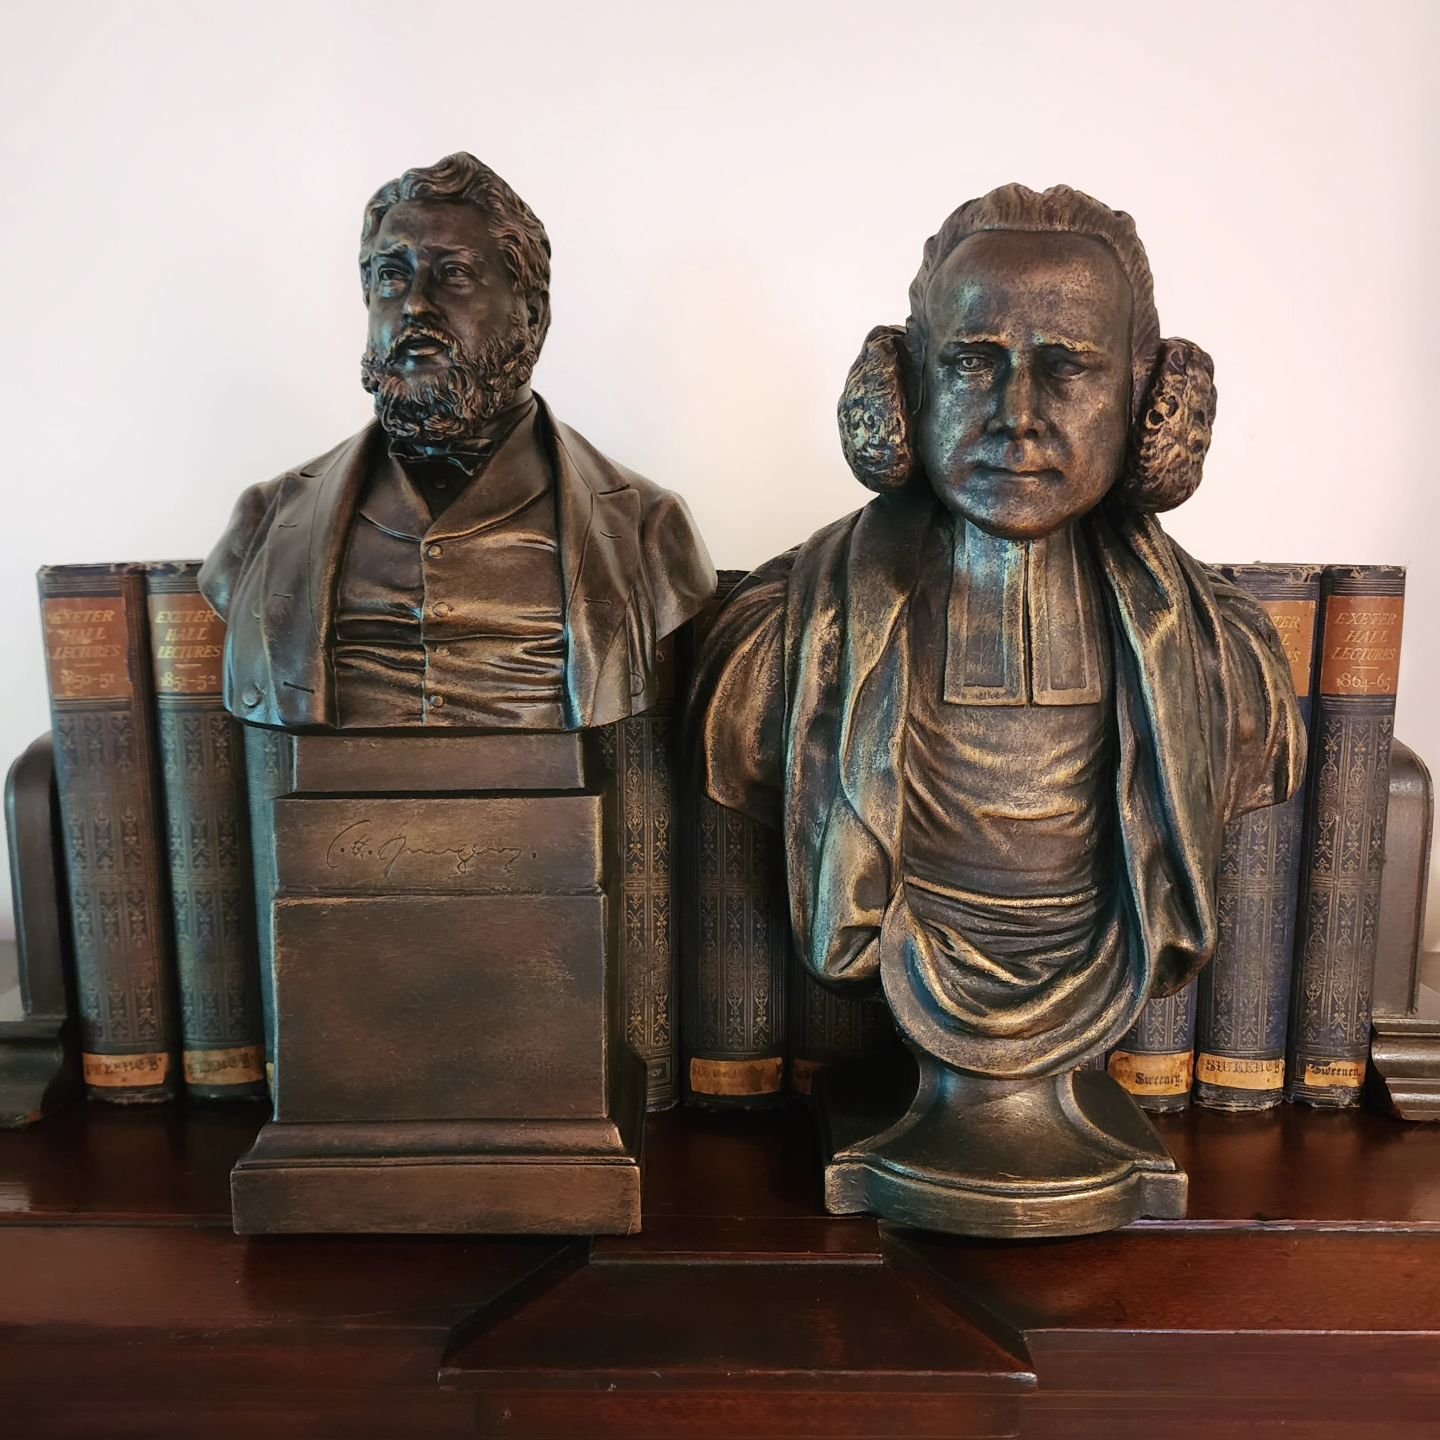 Spurgeon or Whitefield? 🤔 Tough choice.
More CHS large busts available on the website. Only 1 GW bust, though...I'll make it available on there if someone doesn't snag it first.
.
.
.
.
. 
#APilgrimsCoffer #Spurgeon #CharlesSpurgeon #CHSpurgeon #Geo